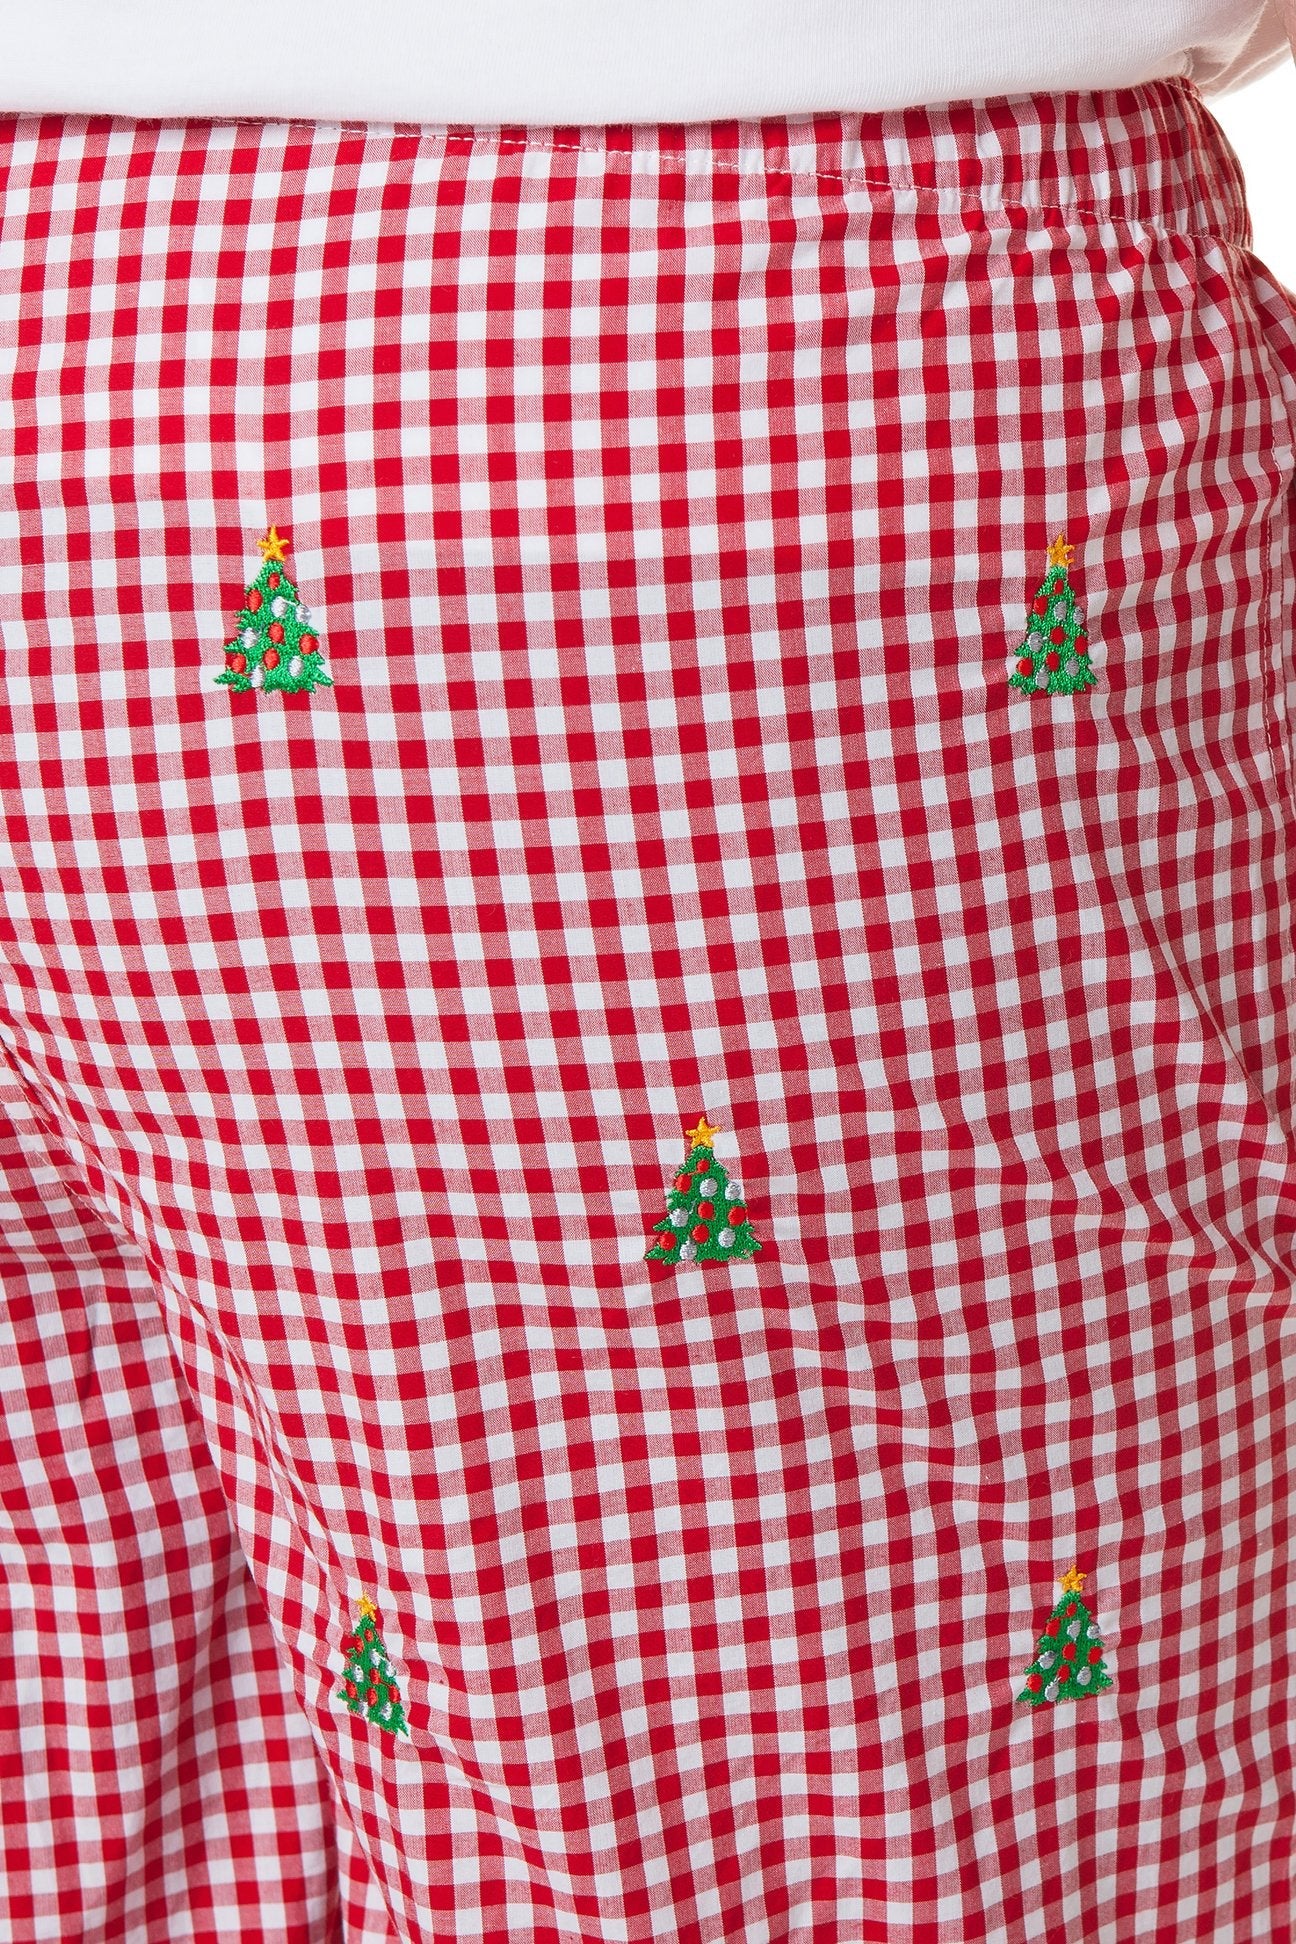 Sleeper Pant Wide Gingham Red with Christmas Tree - CASTAWAY BOXERS - Castaway Nantucket Island